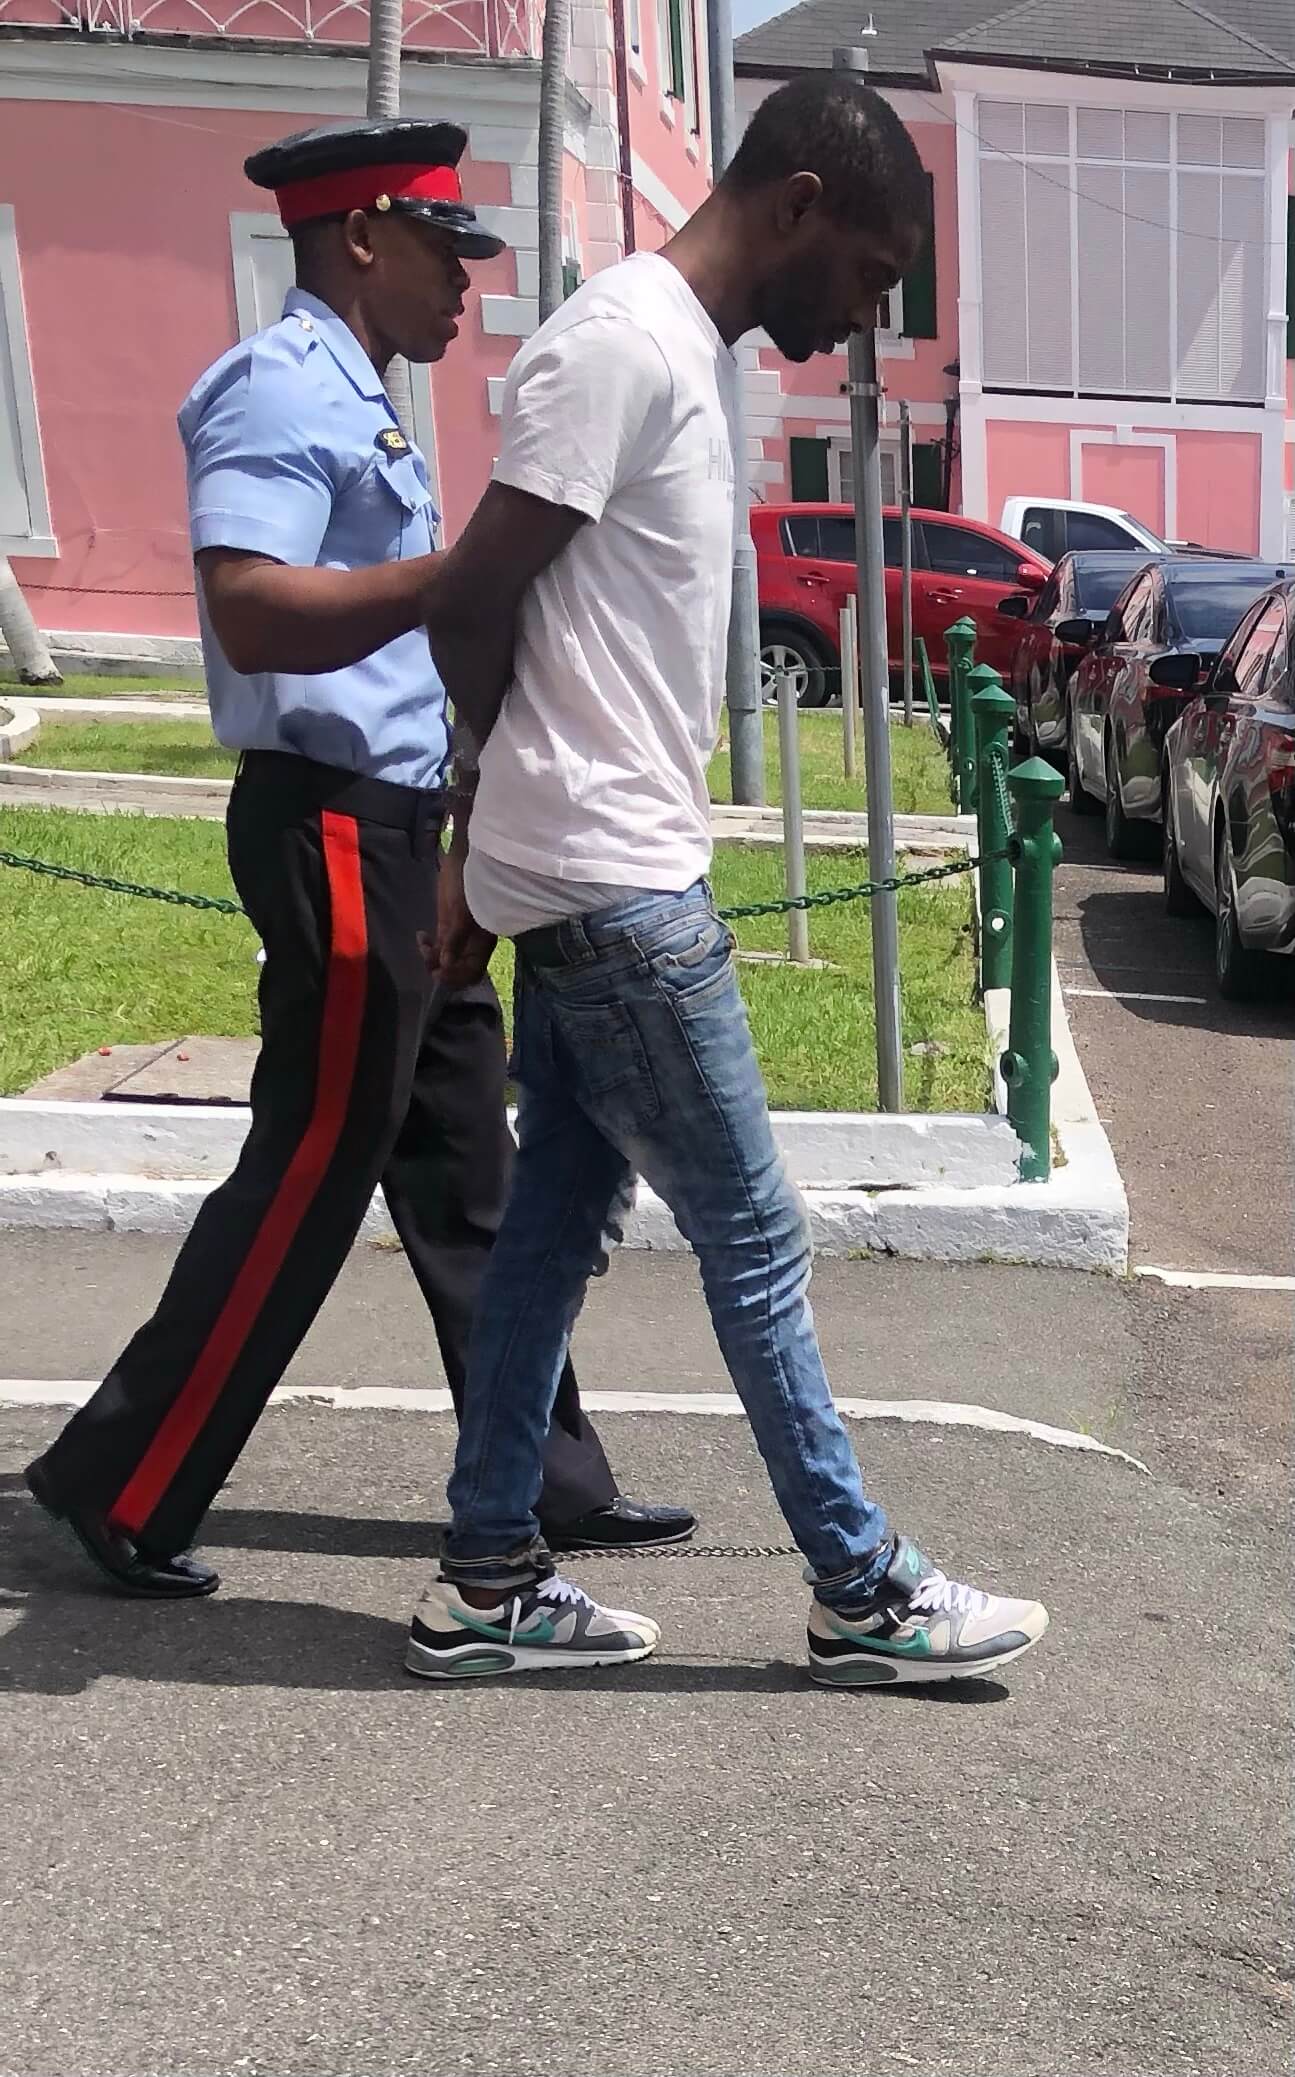 Convict Wayne Smith is escorted by a policeman